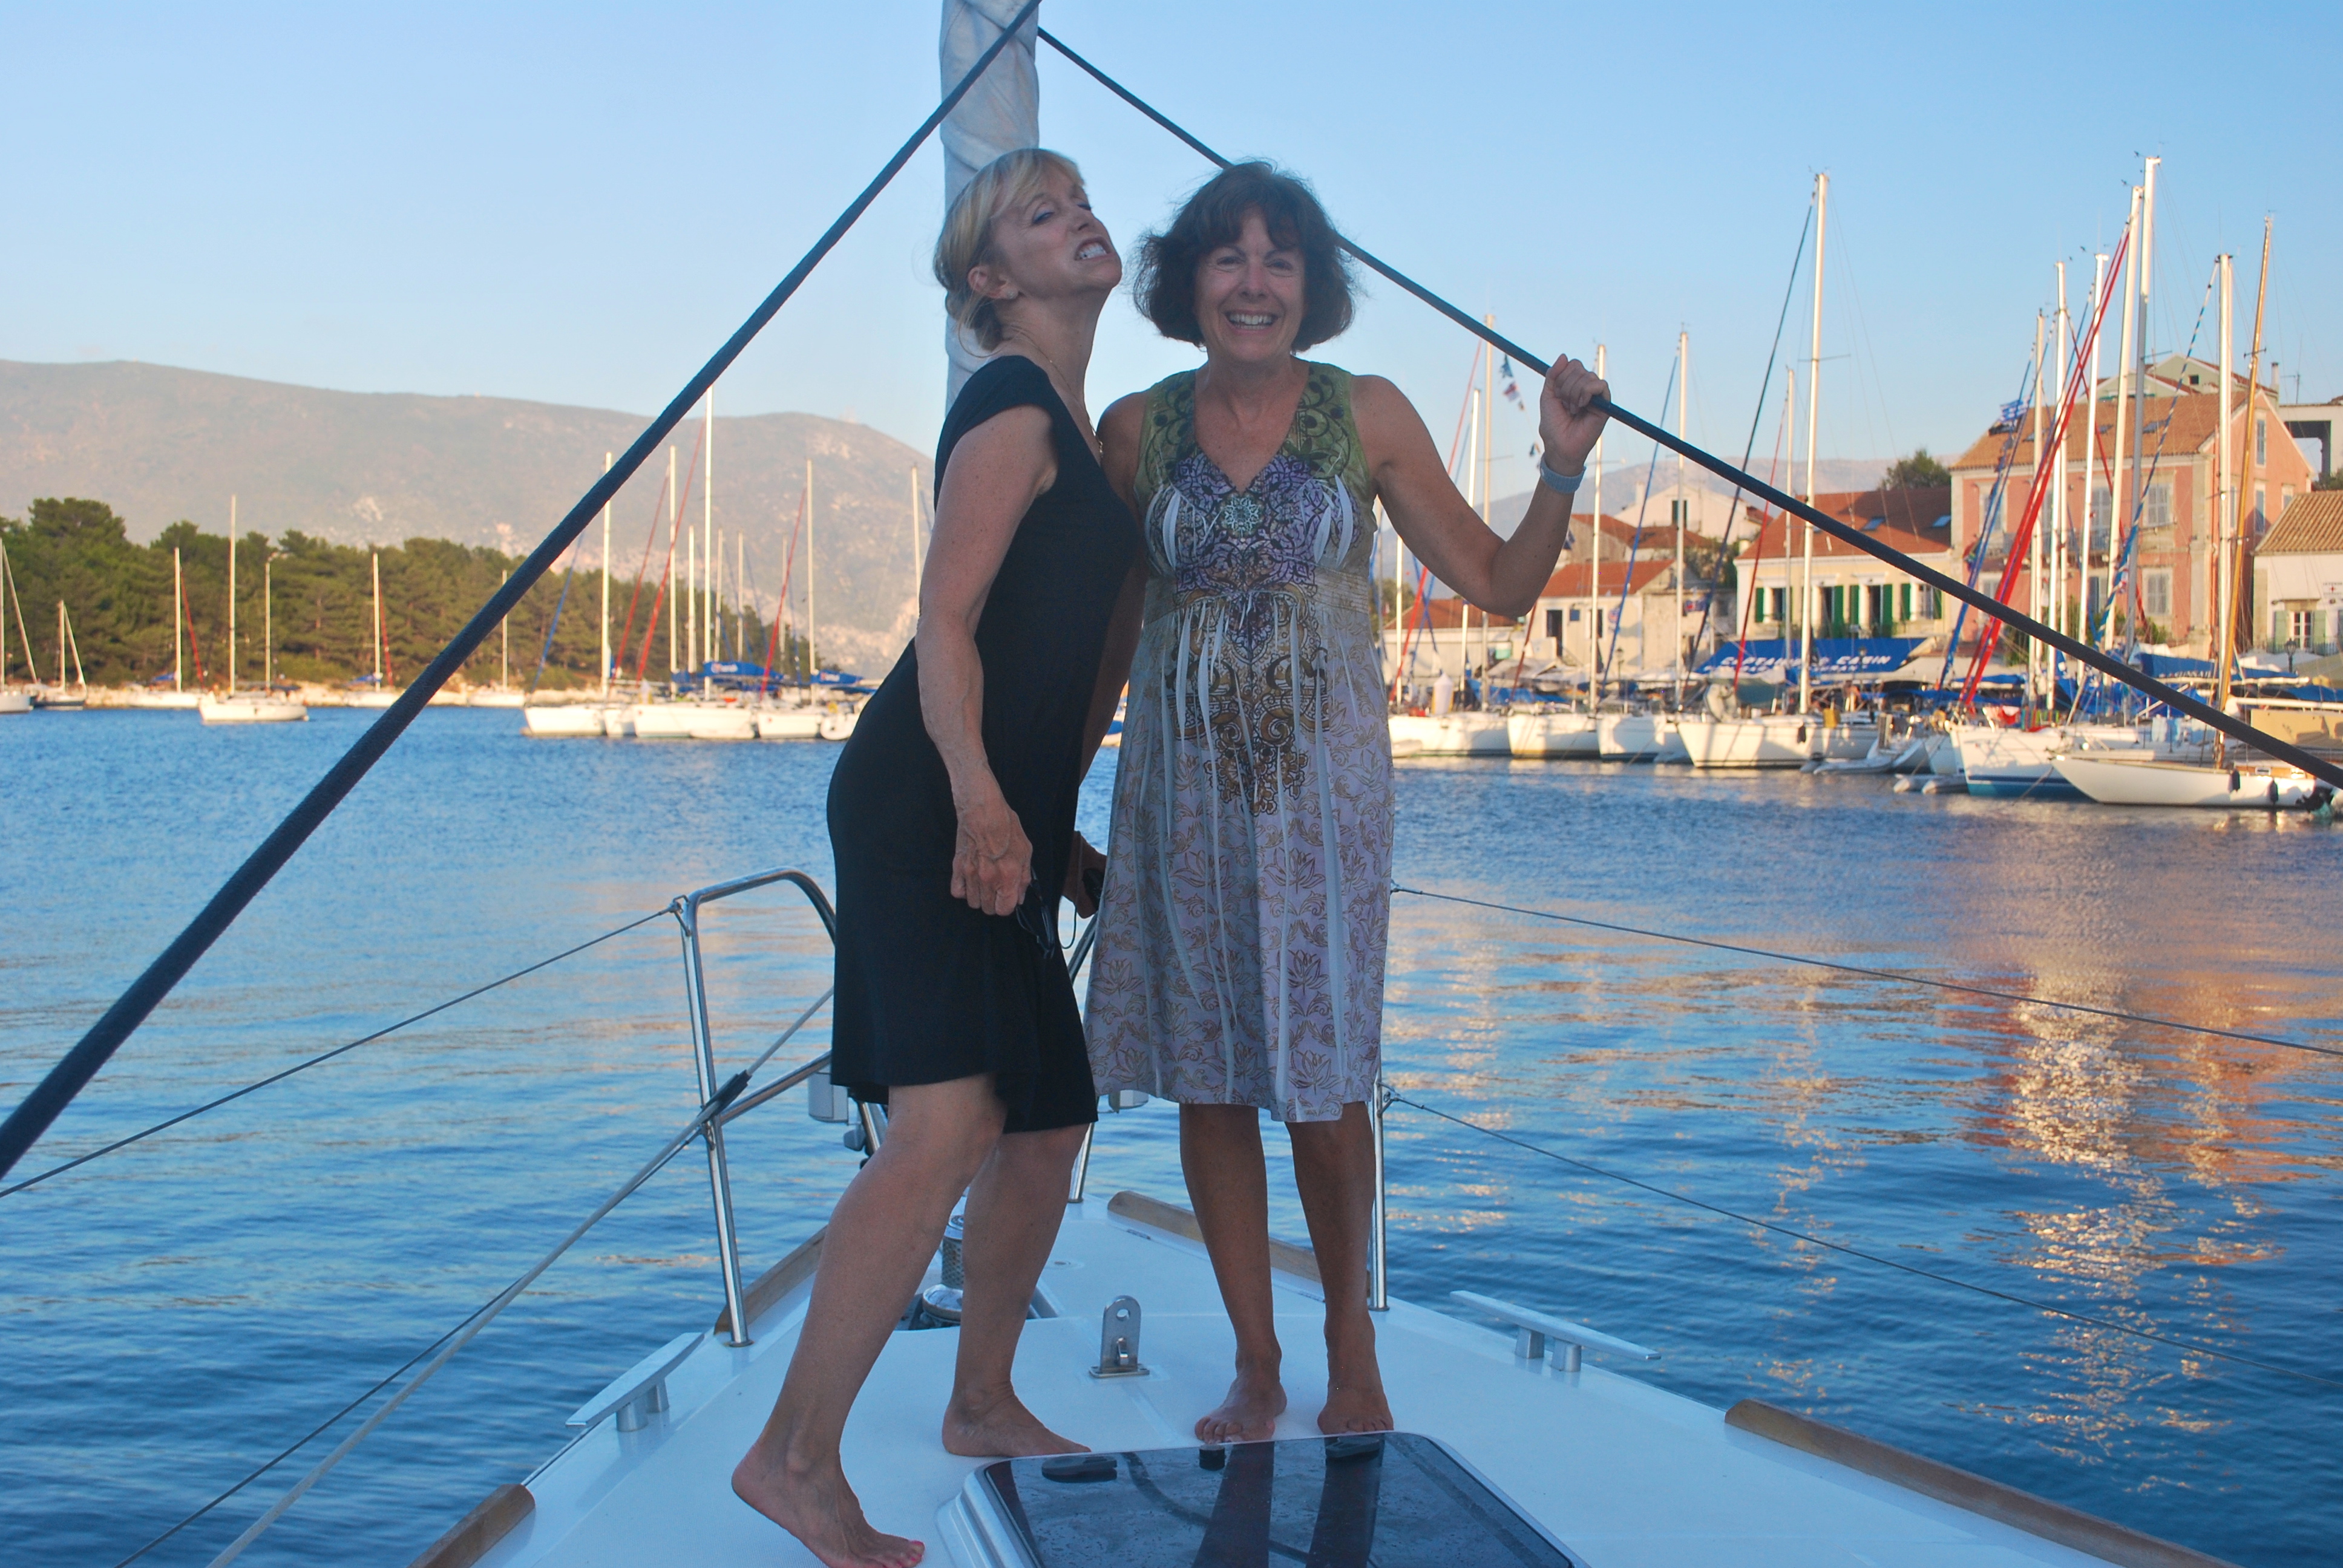 two women on a sailboat